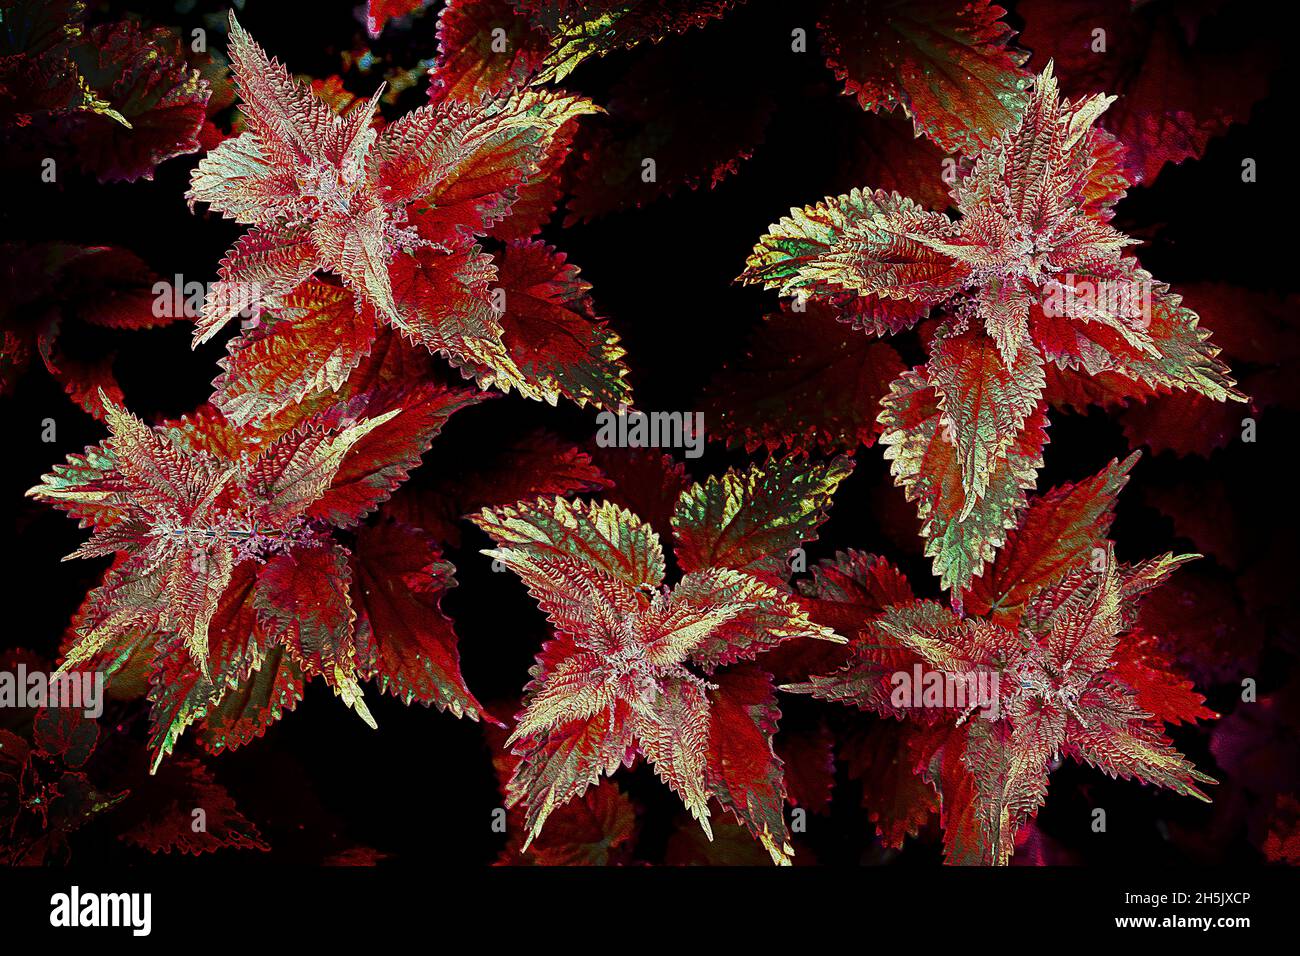 Nettles in red graphic Stock Photo